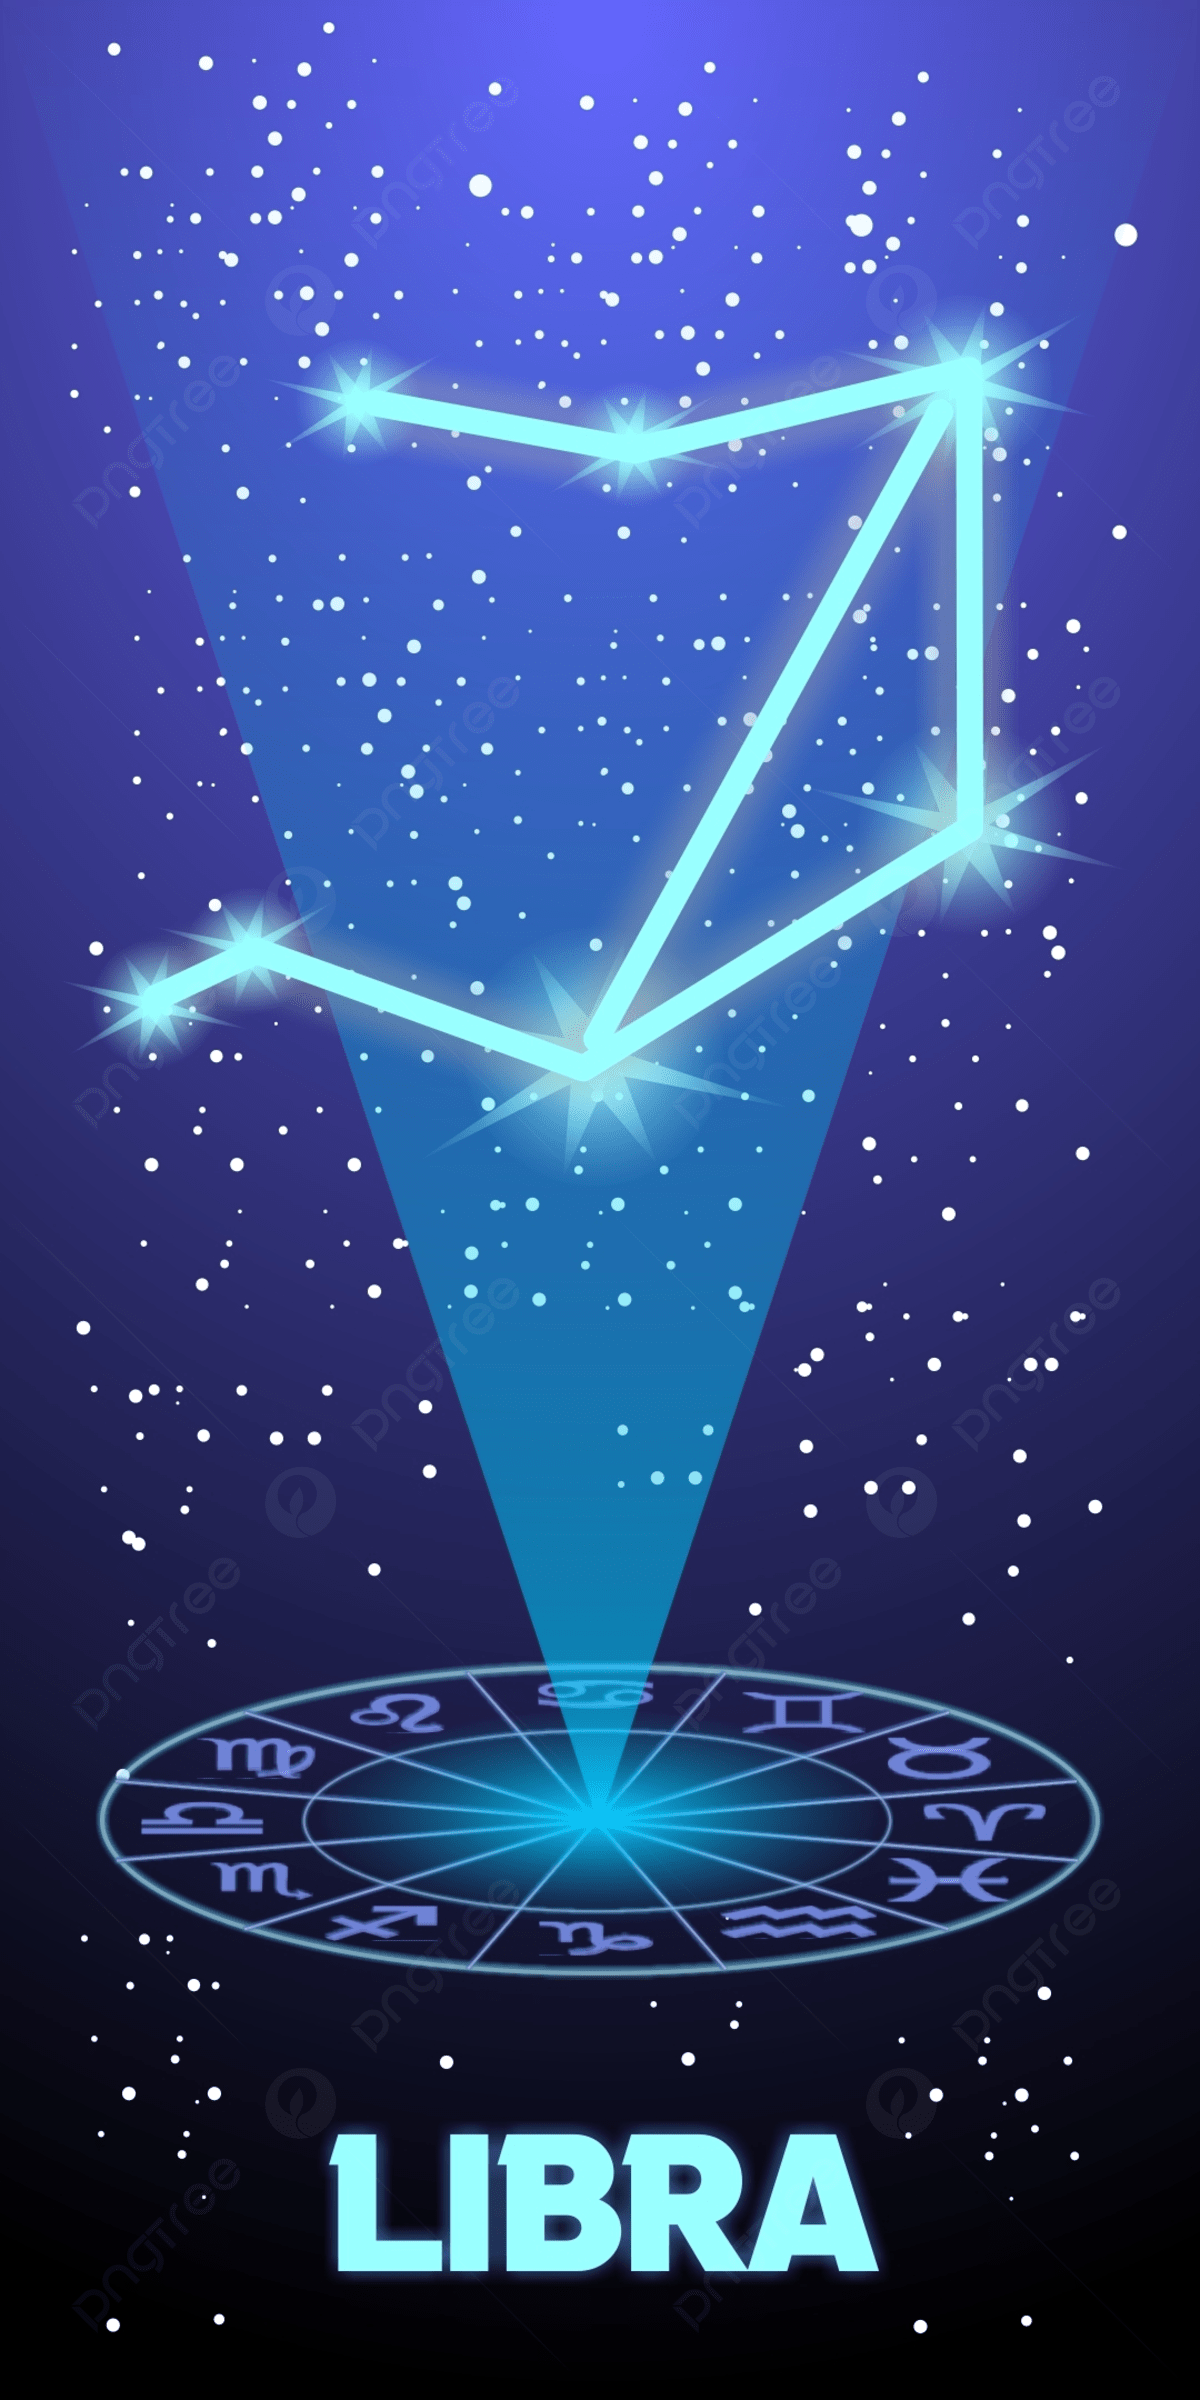 Libra Background Image, HD Picture and Wallpaper For Free Download